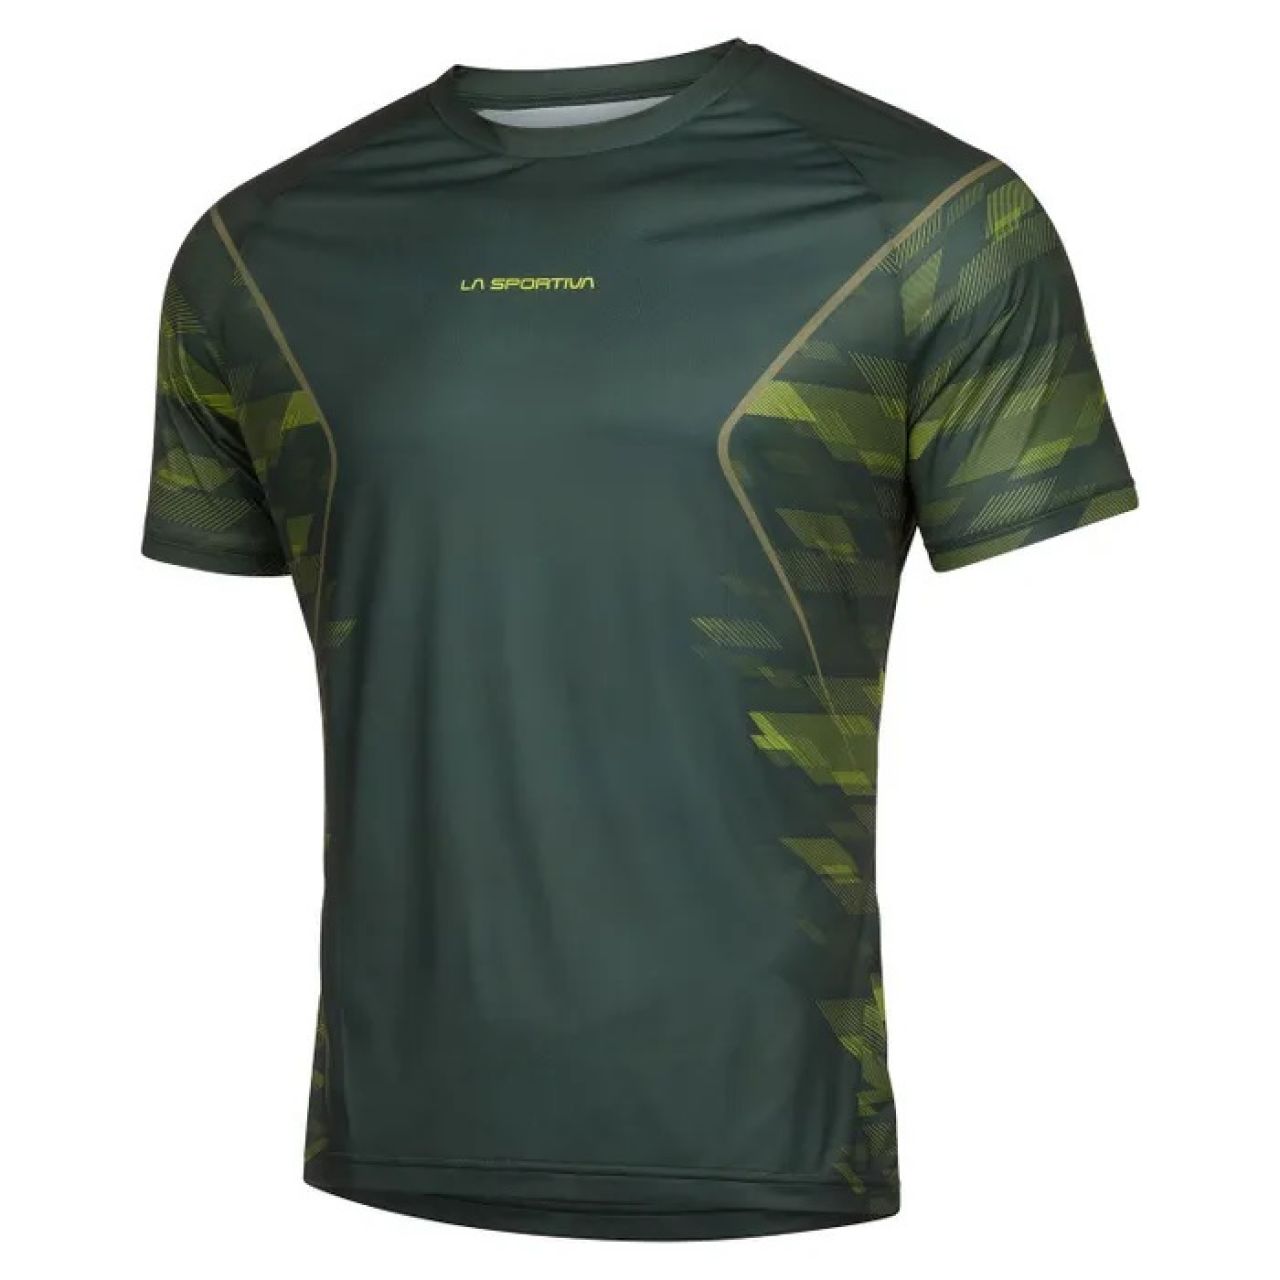 LA SPORTIVA PACER TEE SHIRT FOREST ET LIME PUNCH Tee shirt running homme